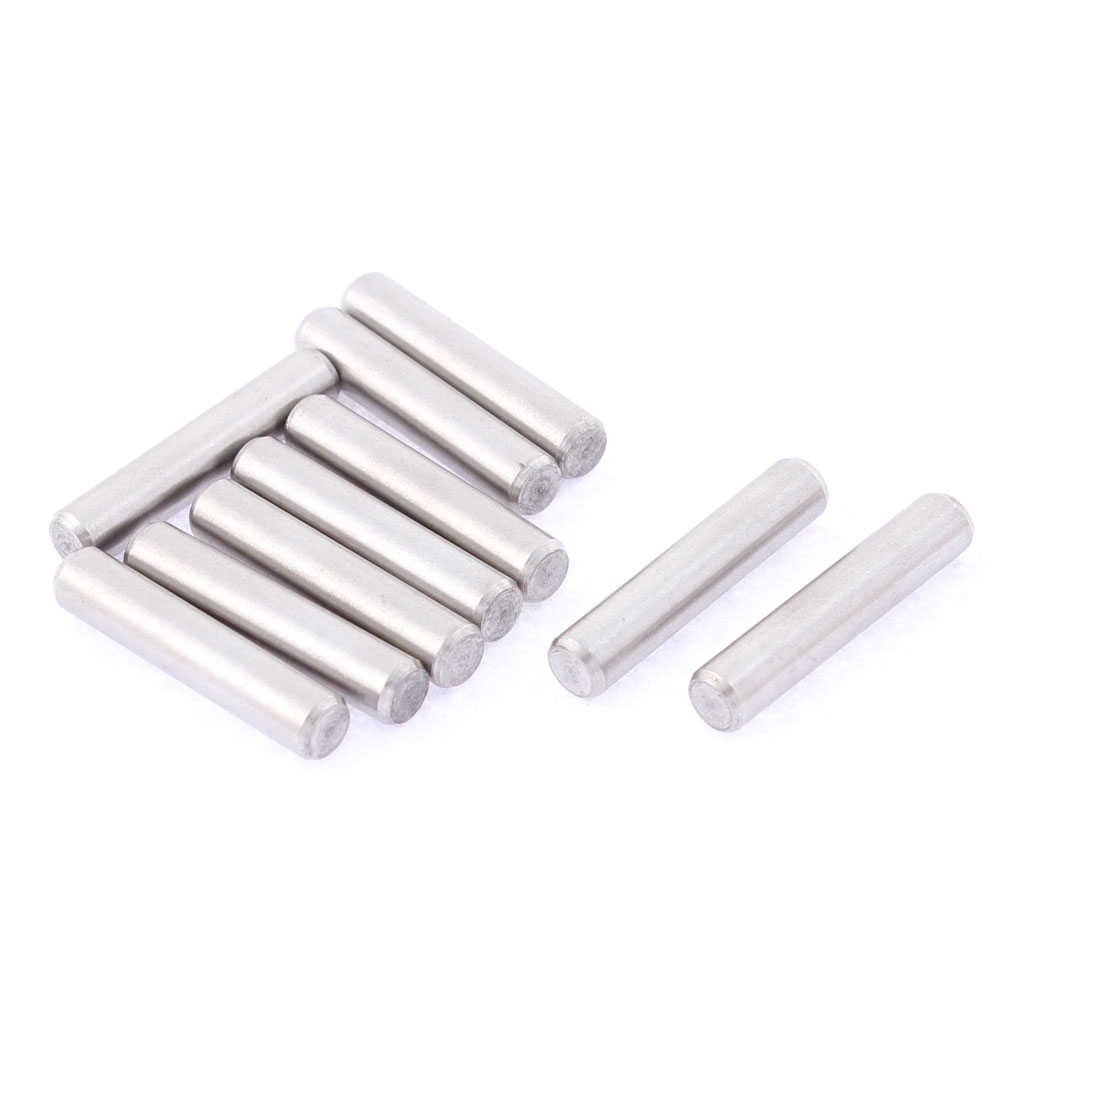 M6x30mm Stainless Steel Straight Retaining Dowel Pins Rod Fasten Elements 10 Pcs